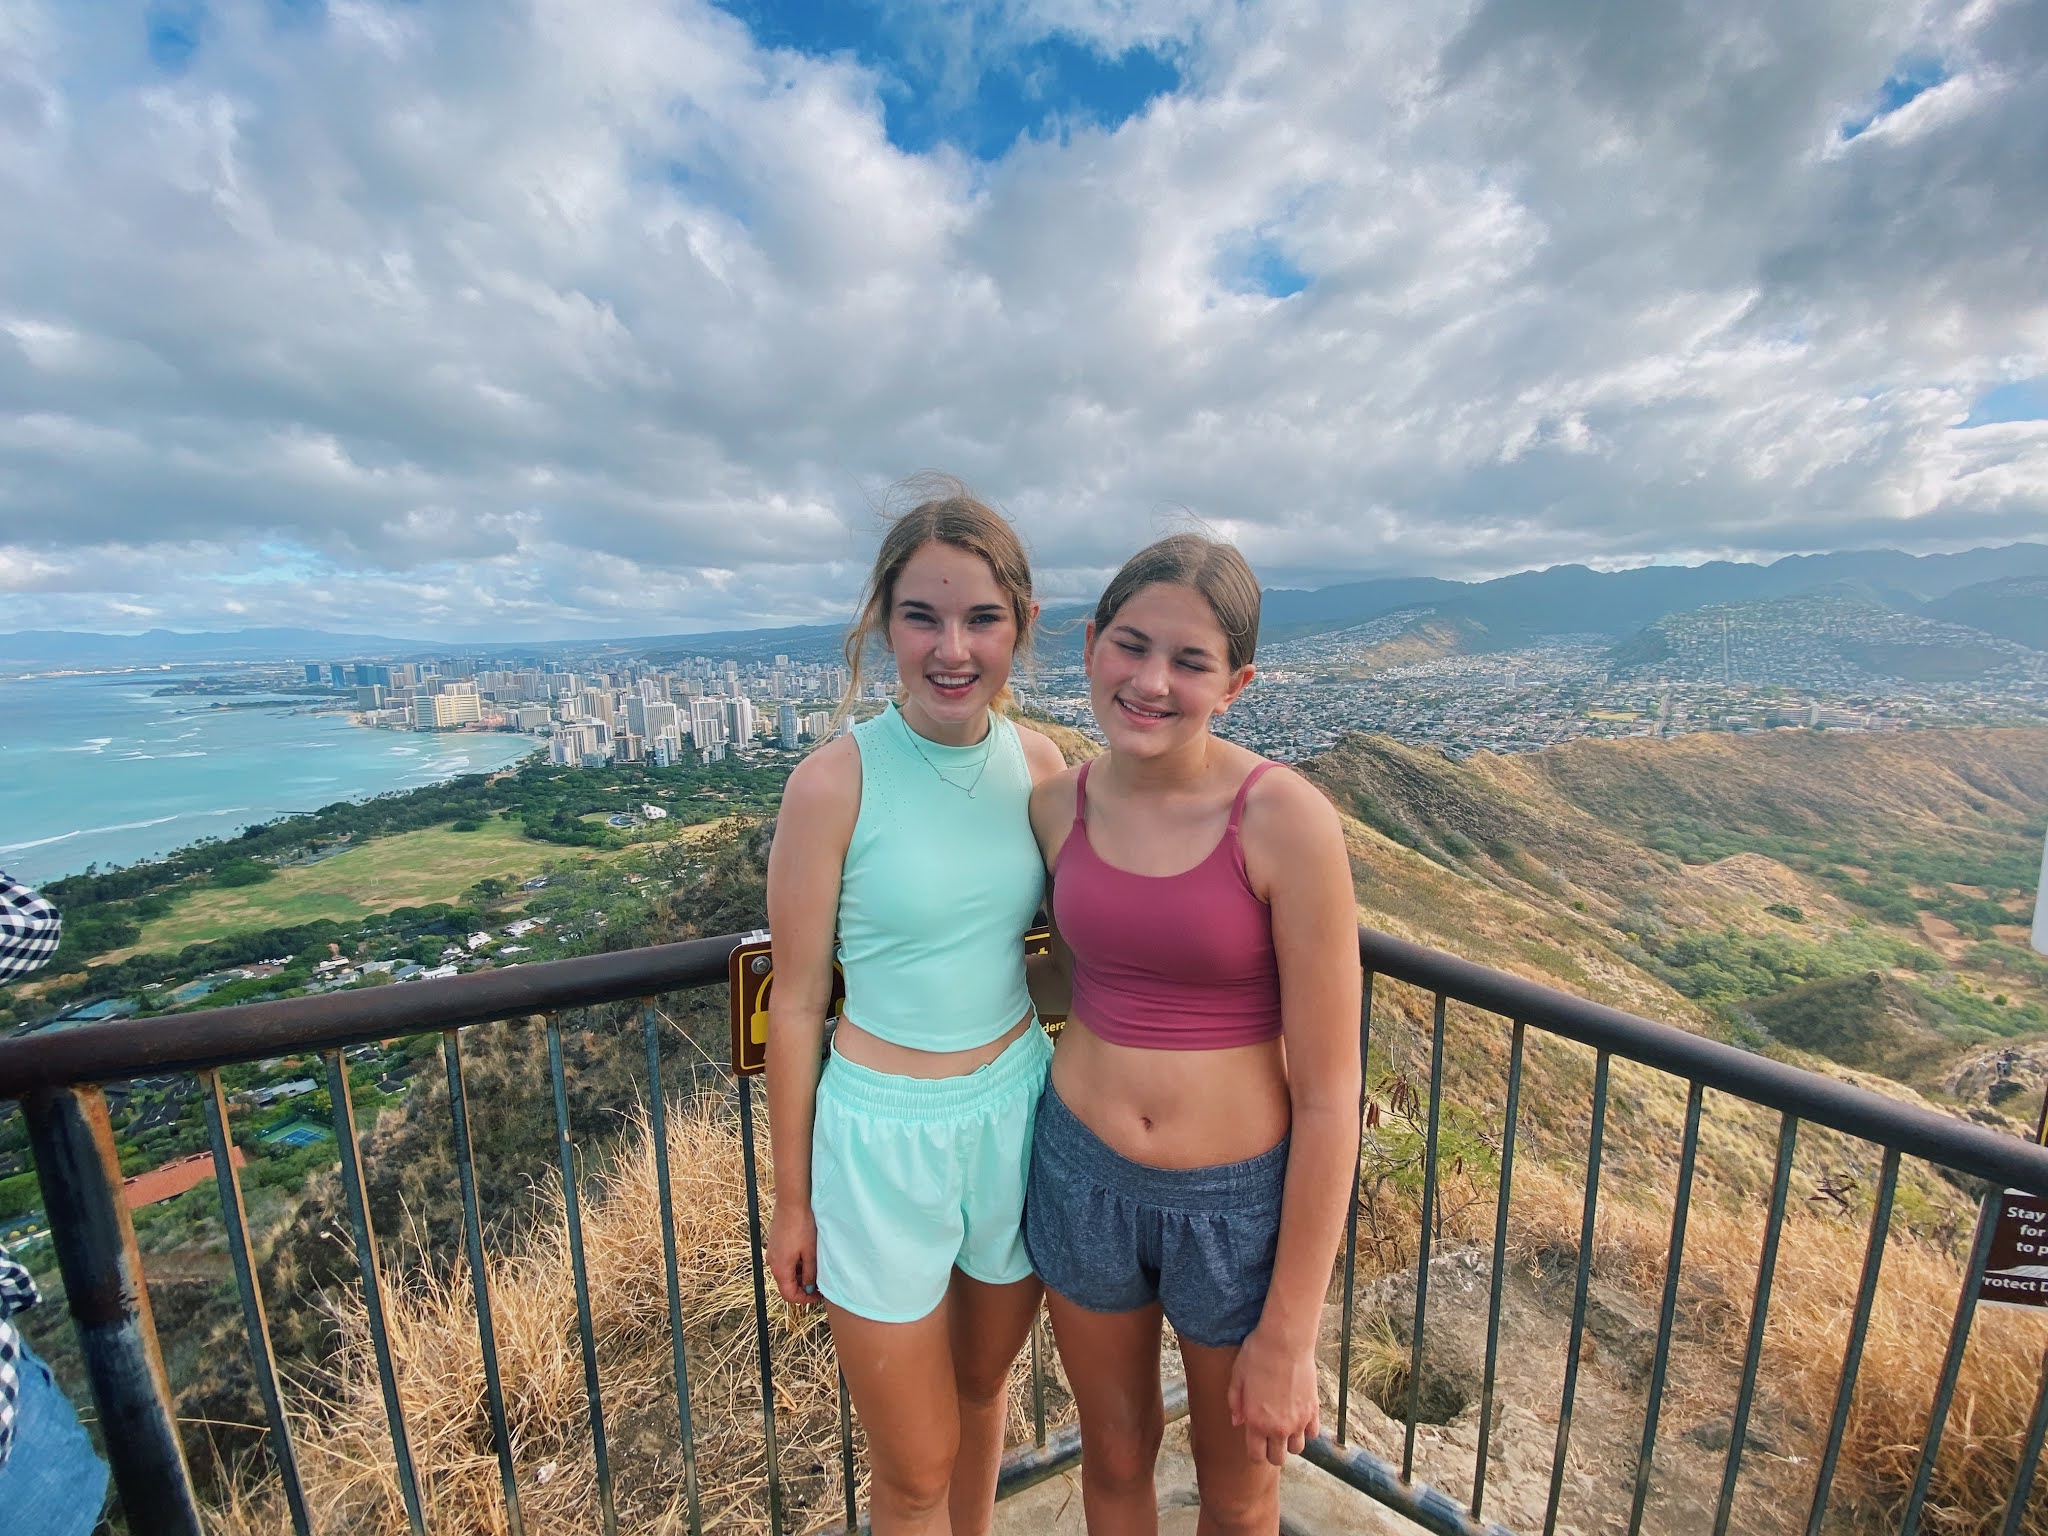 72 Hours On Oahu // What To Eat & Do In Honolulu + North Shore